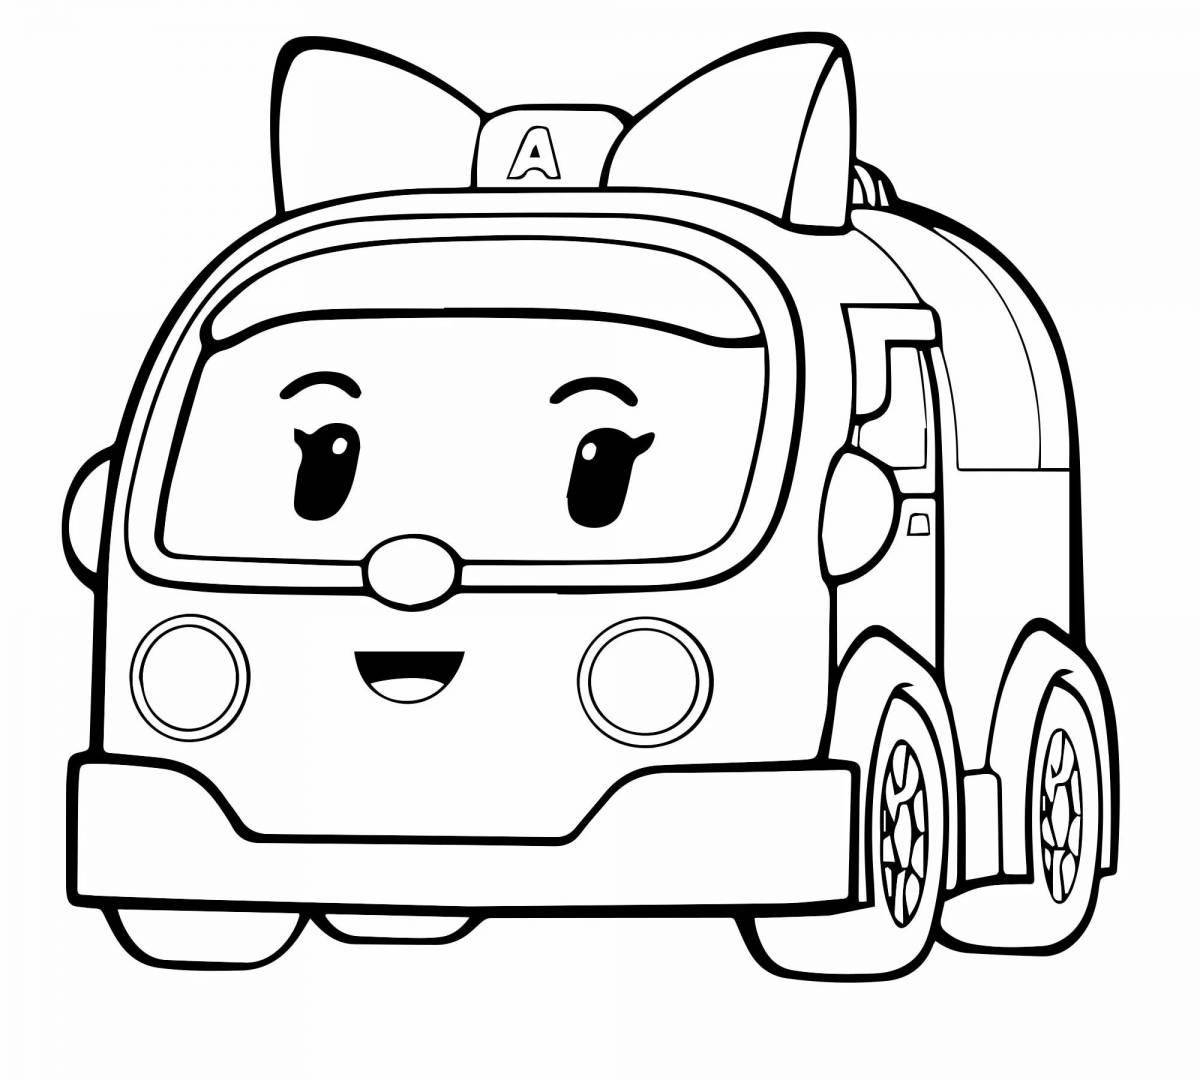 Bold autopatrol coloring page